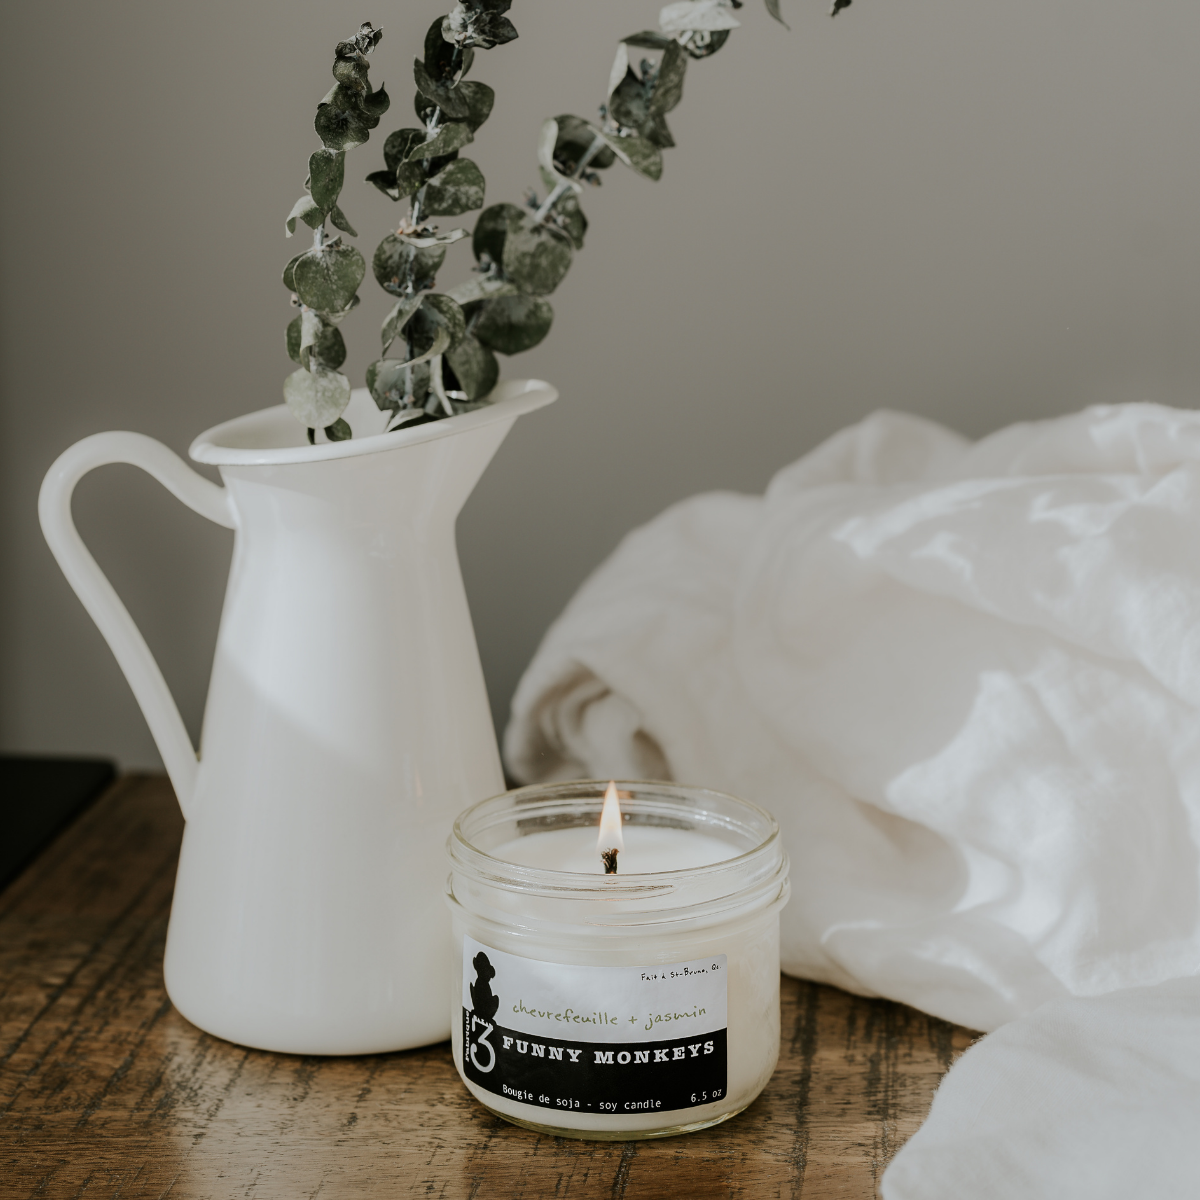 Honeysuckle and jasmine, soy candle